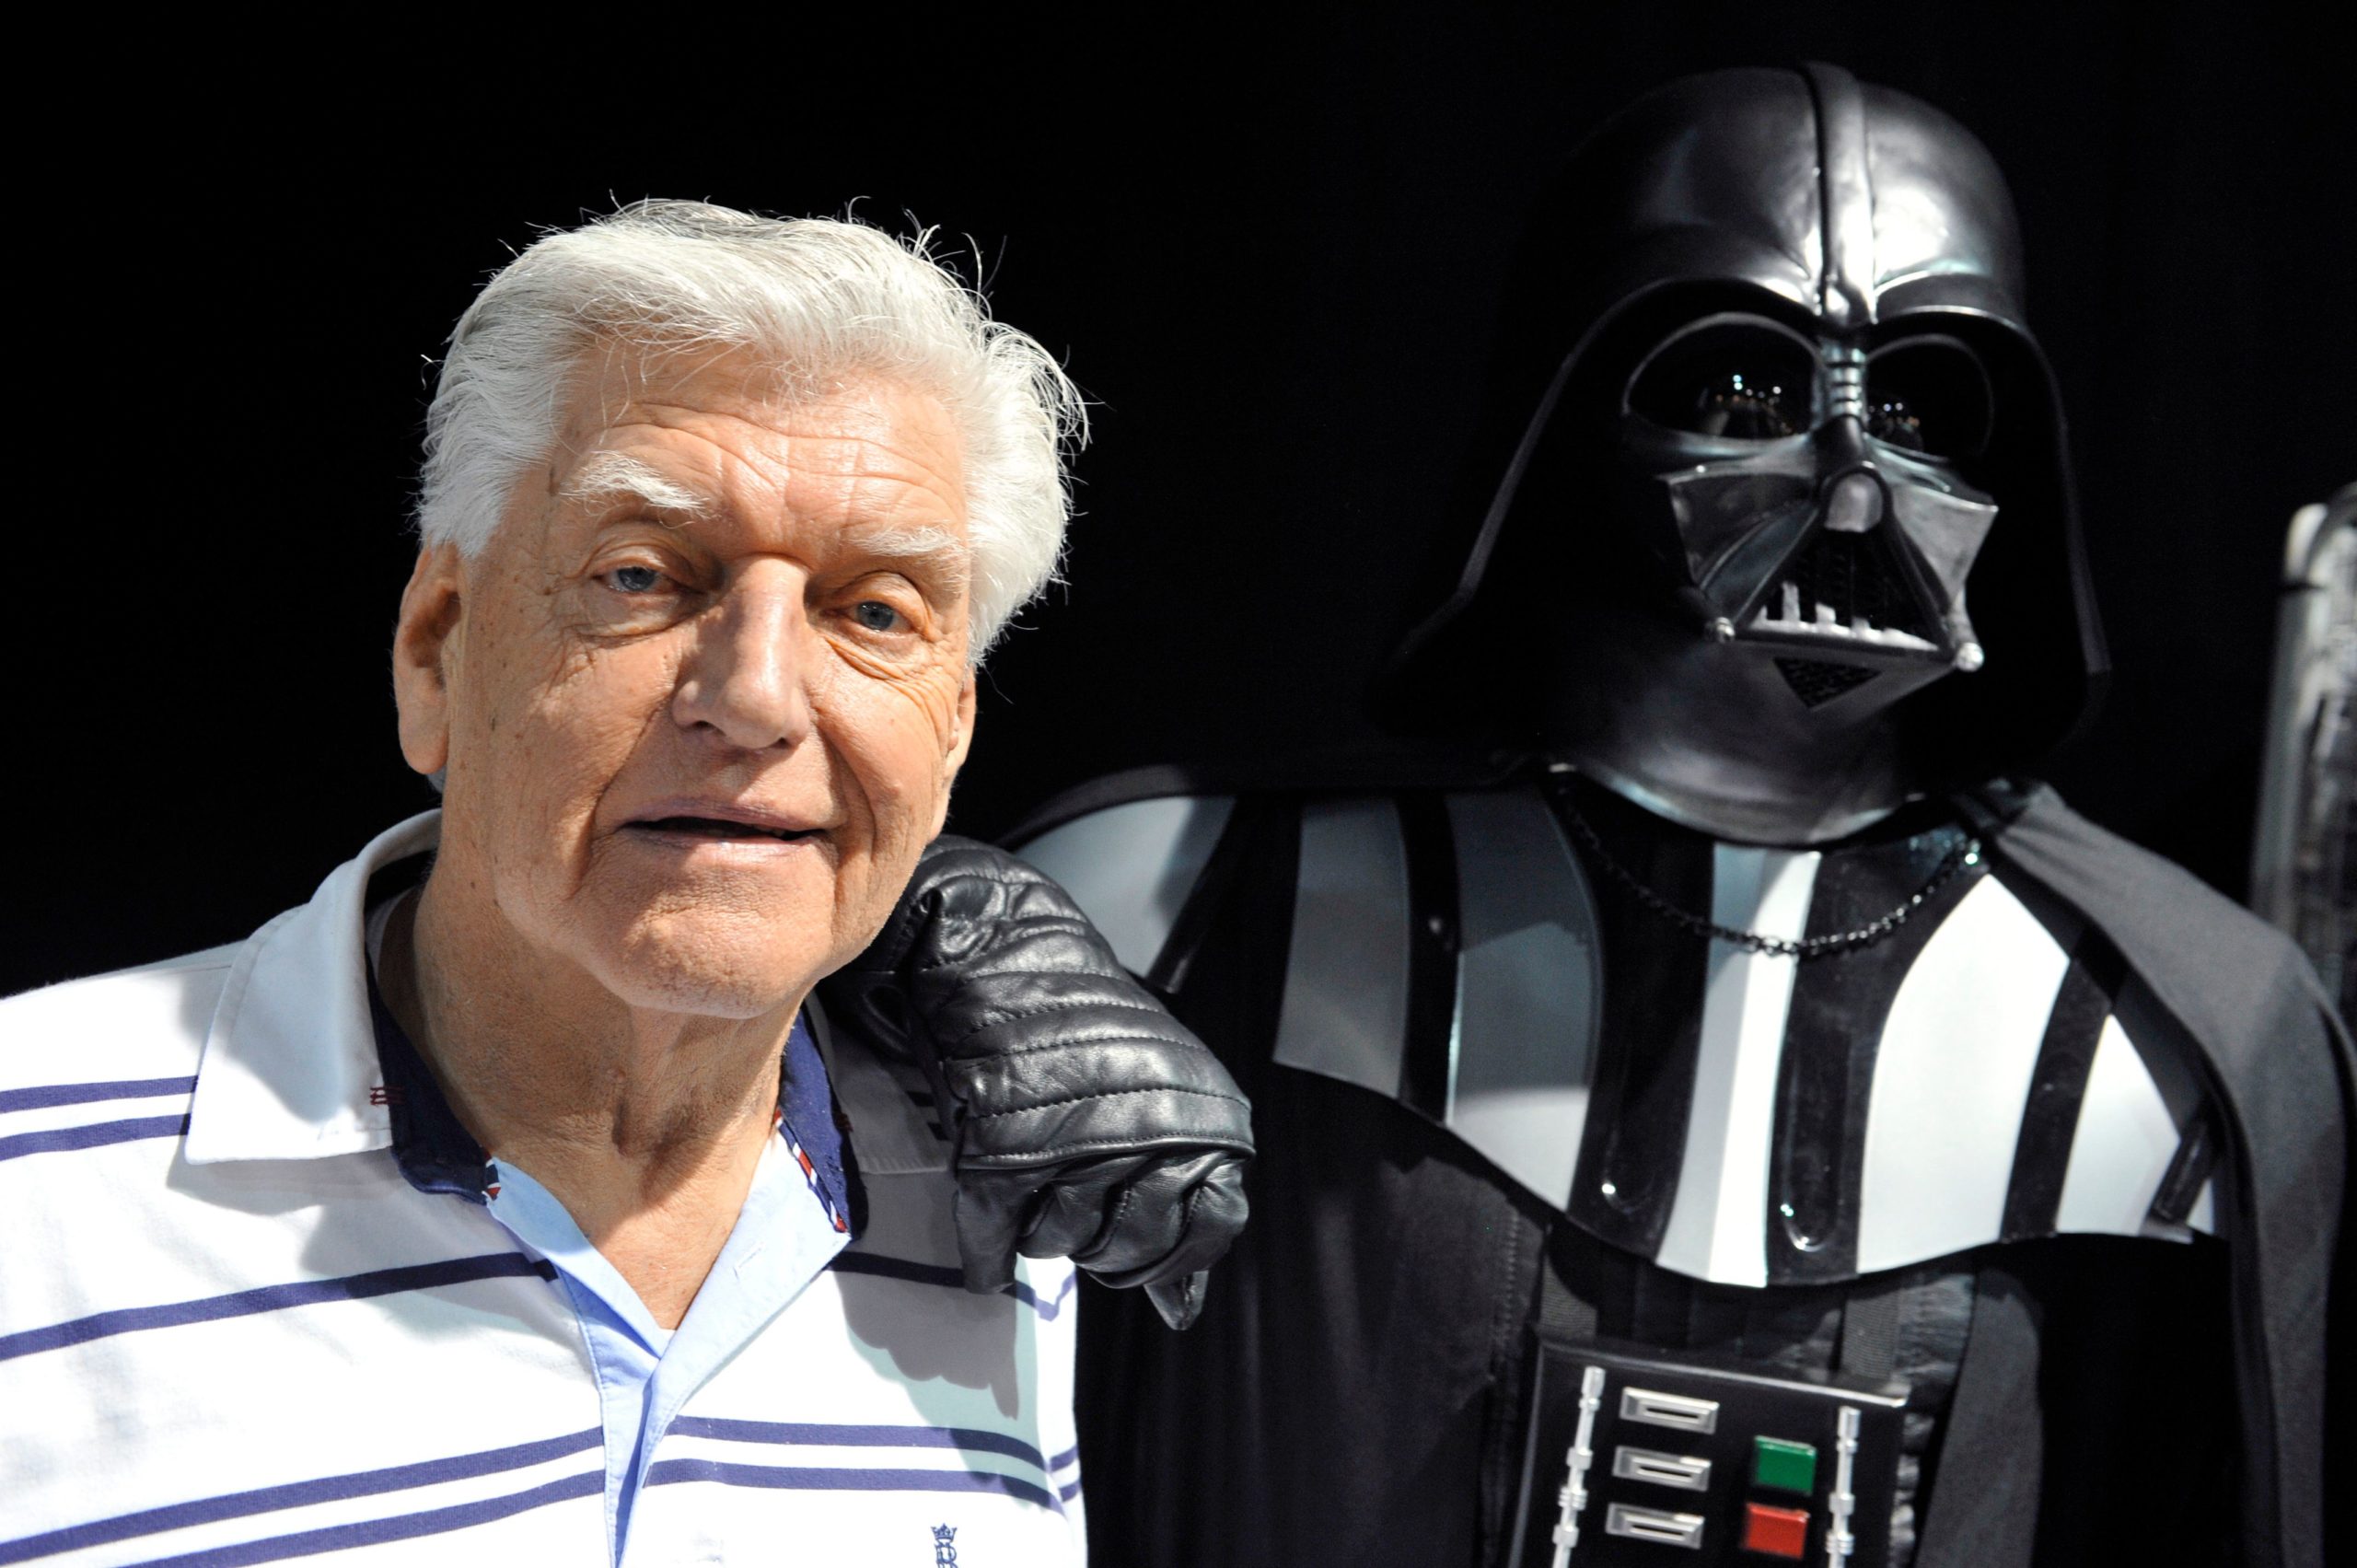 David Prowse (Photo: Thierry ZOCCOLAN / AFP, Getty Images)